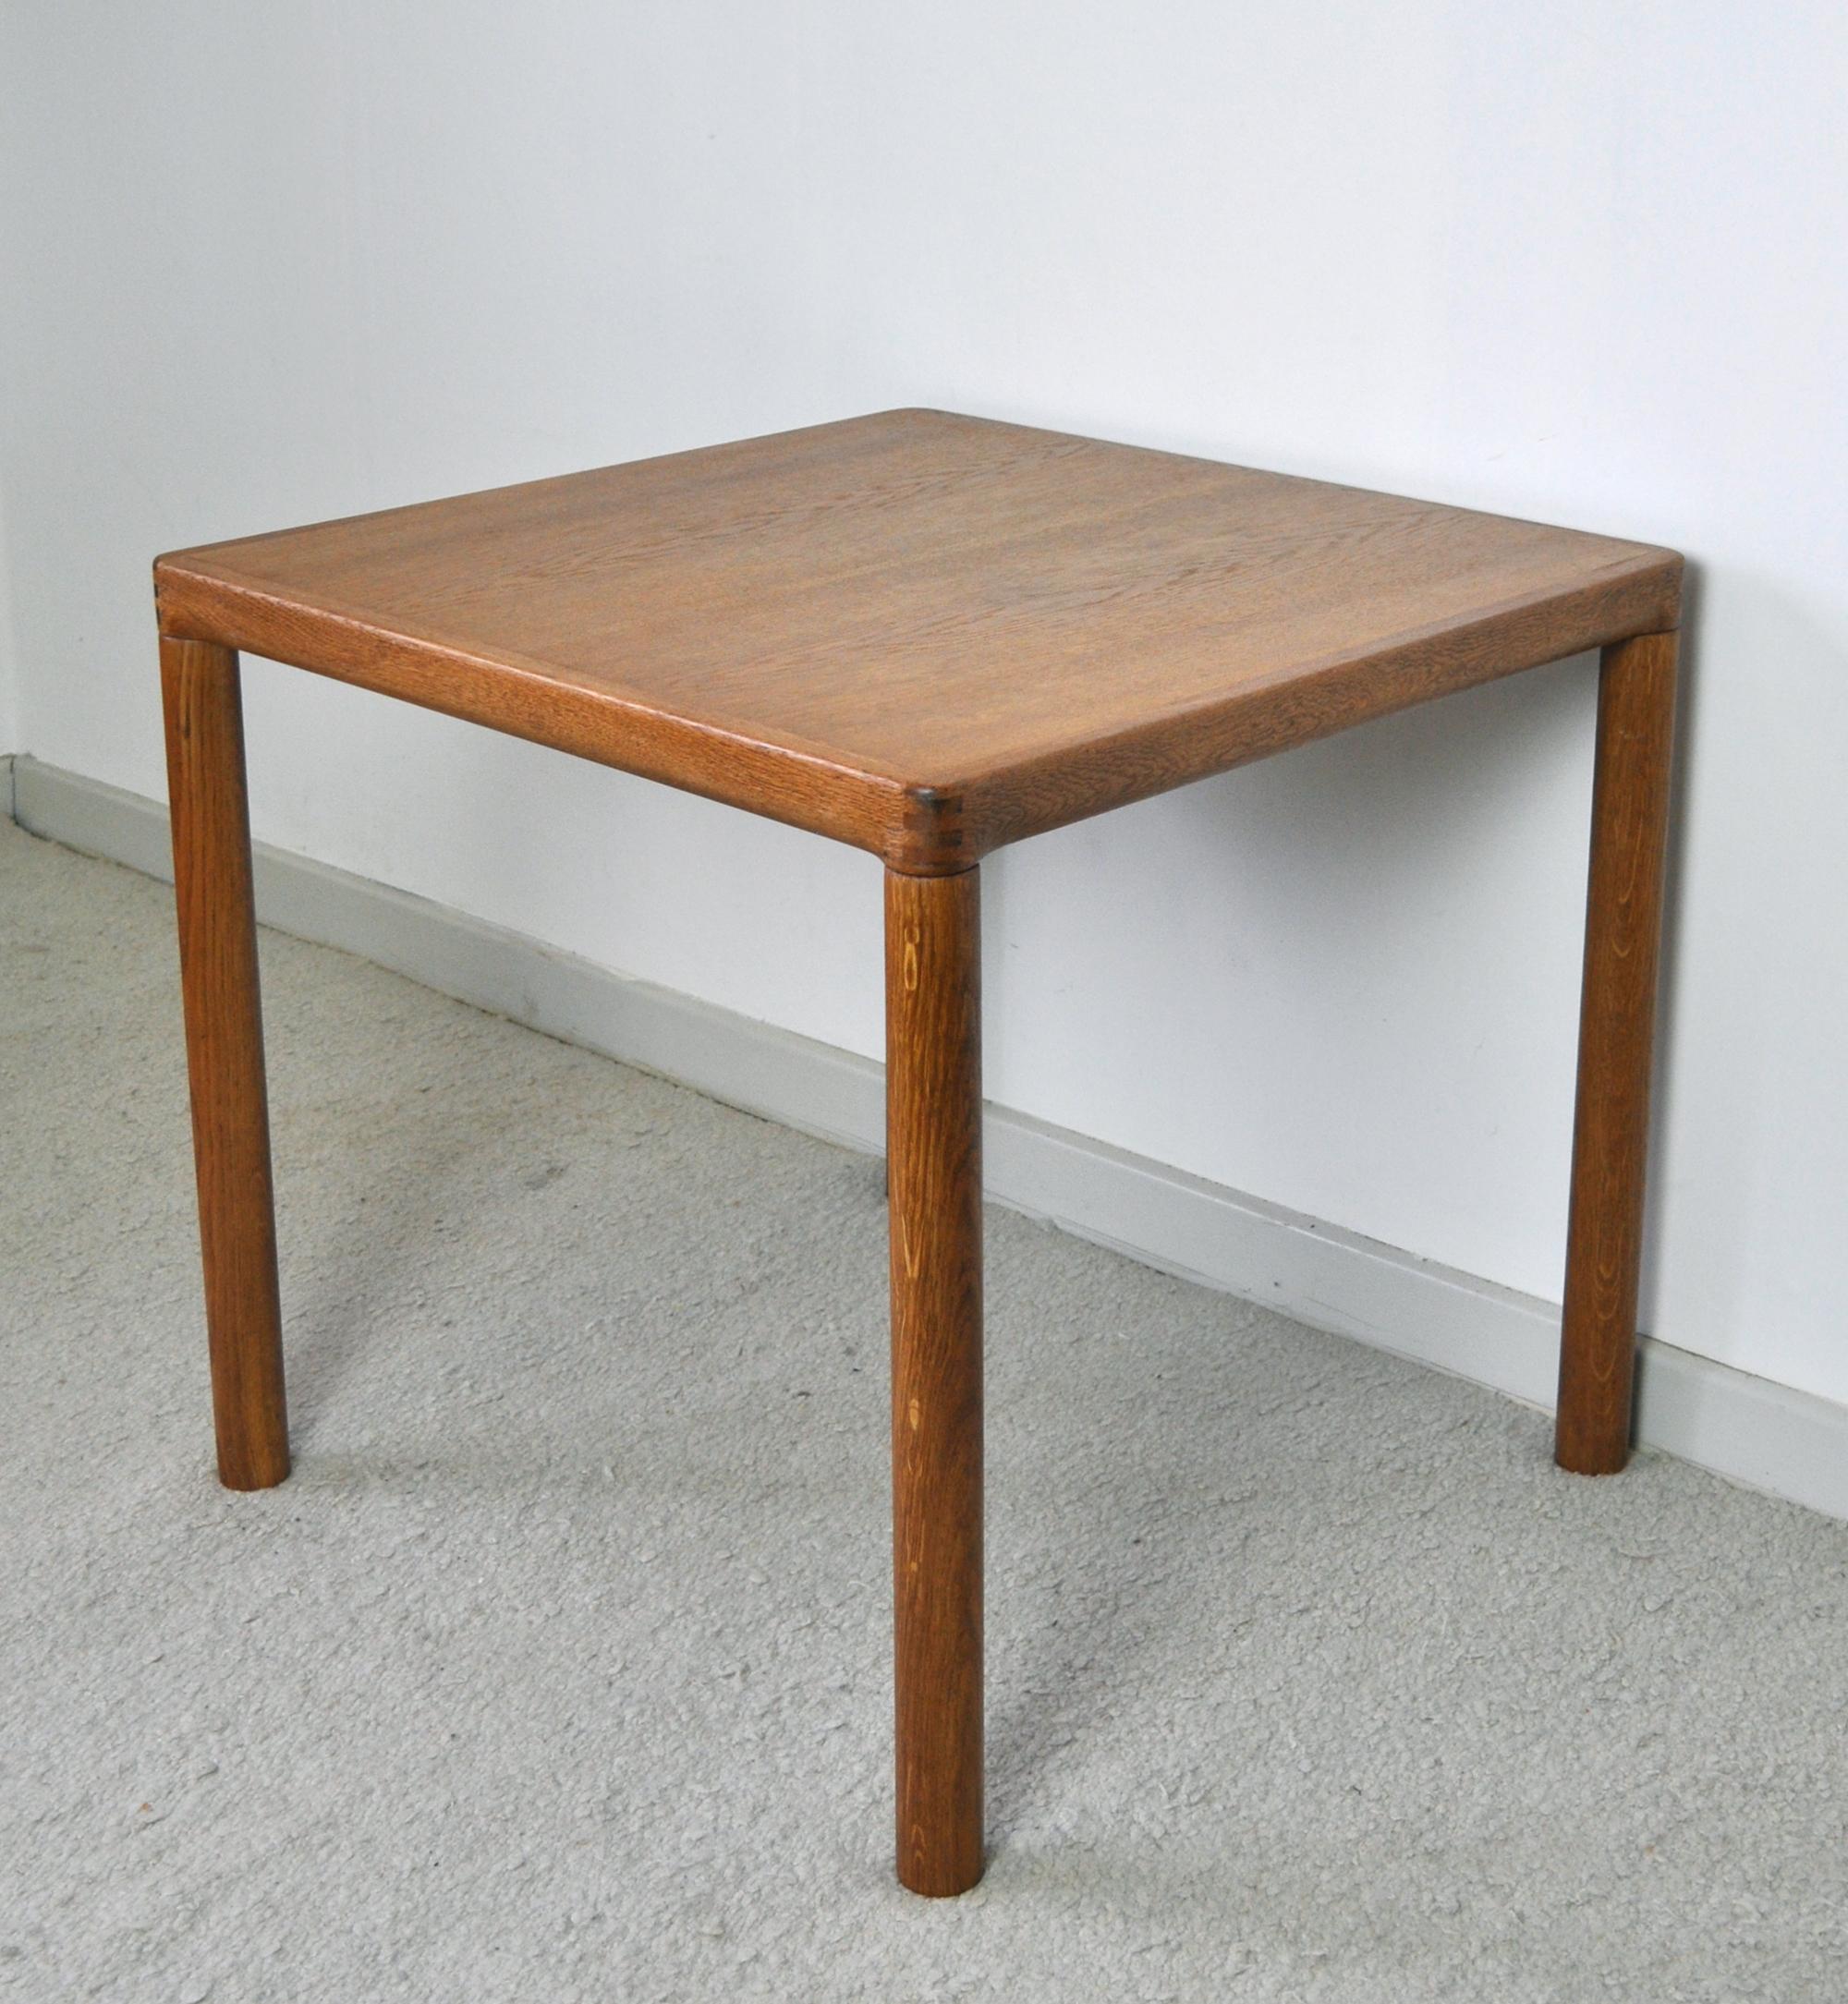 Occasional table by Norwegian designer Henry Walter (H.W.) Klein. Elegant details and joinery. Made by Bramin in Denmark.